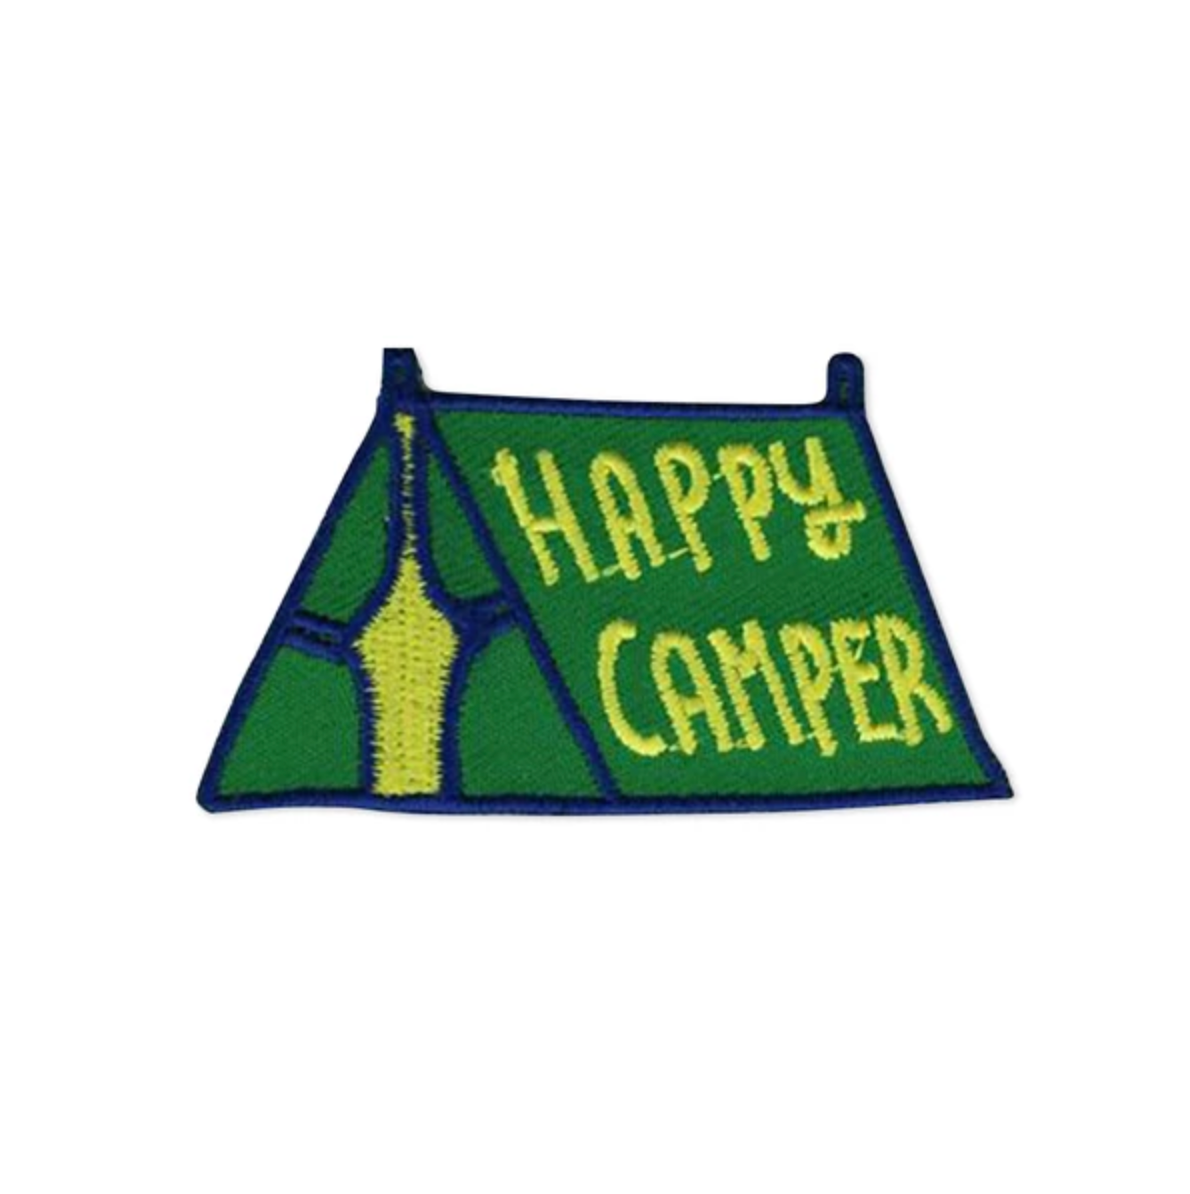 By Badge Bomb. Iron on Happy Camper Tent Green Patch by Kate Sutton. Comes packaged in individual hang bag. Measures 2.25 x 1.25 inches.